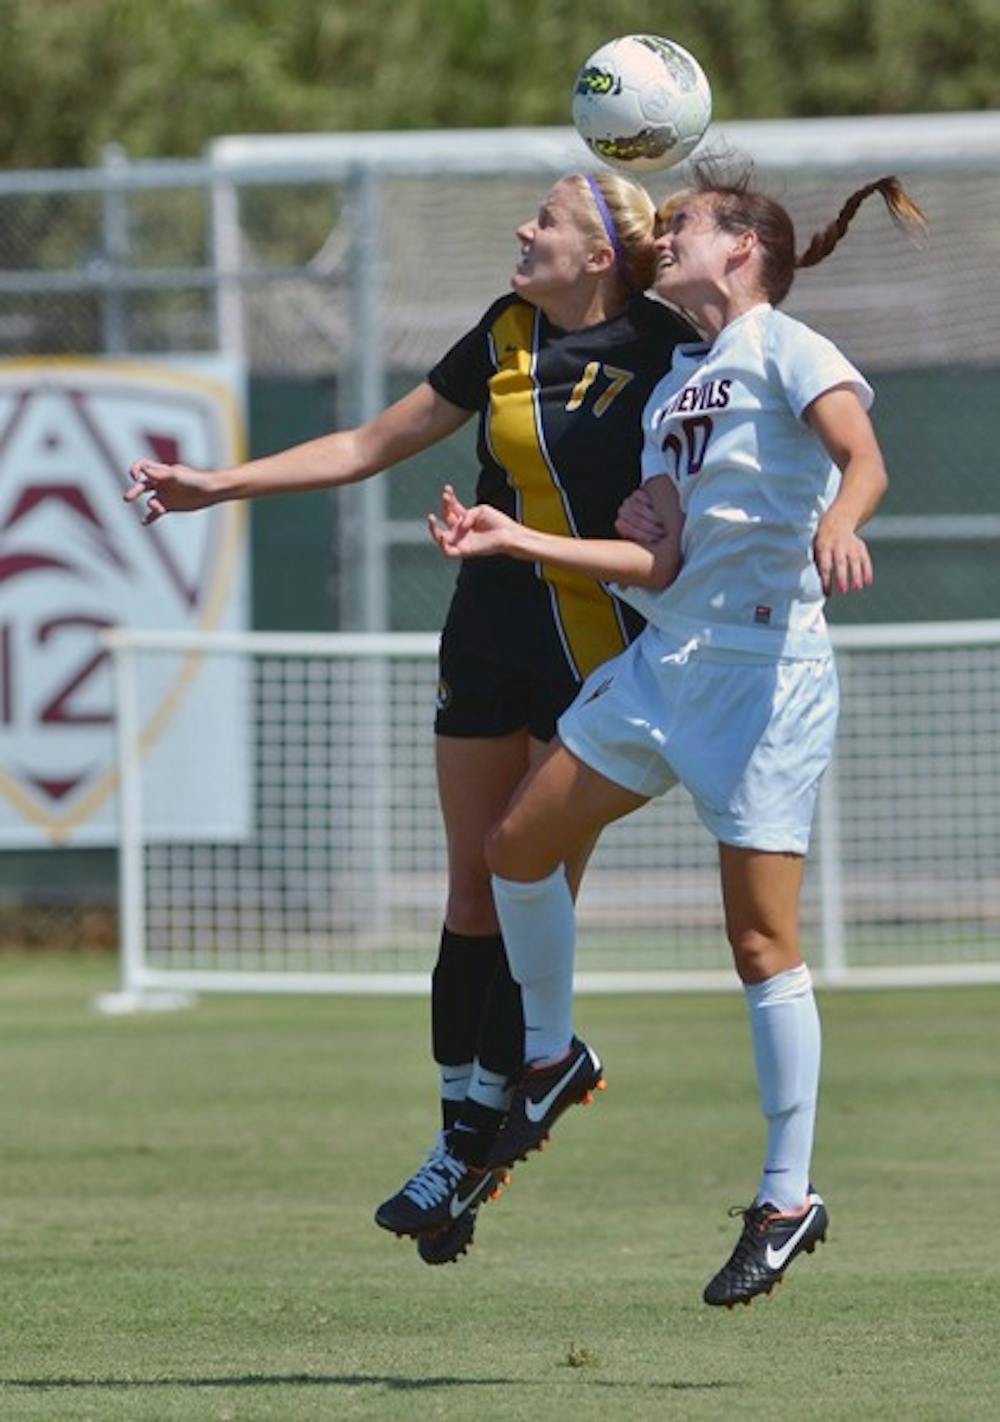 COLLISION COURSE: Sophomore defender Jasmine Roth reaches for a header against Missouri senior midfielder Kelsey Blincow in the Sun Devils’ meeting against the Tigers on Sept. 11. The ASU soccer team heads to Berkeley, Calif. to face the Cal Golden Bears on Friday. (Photo by Aaron Lavinsky)